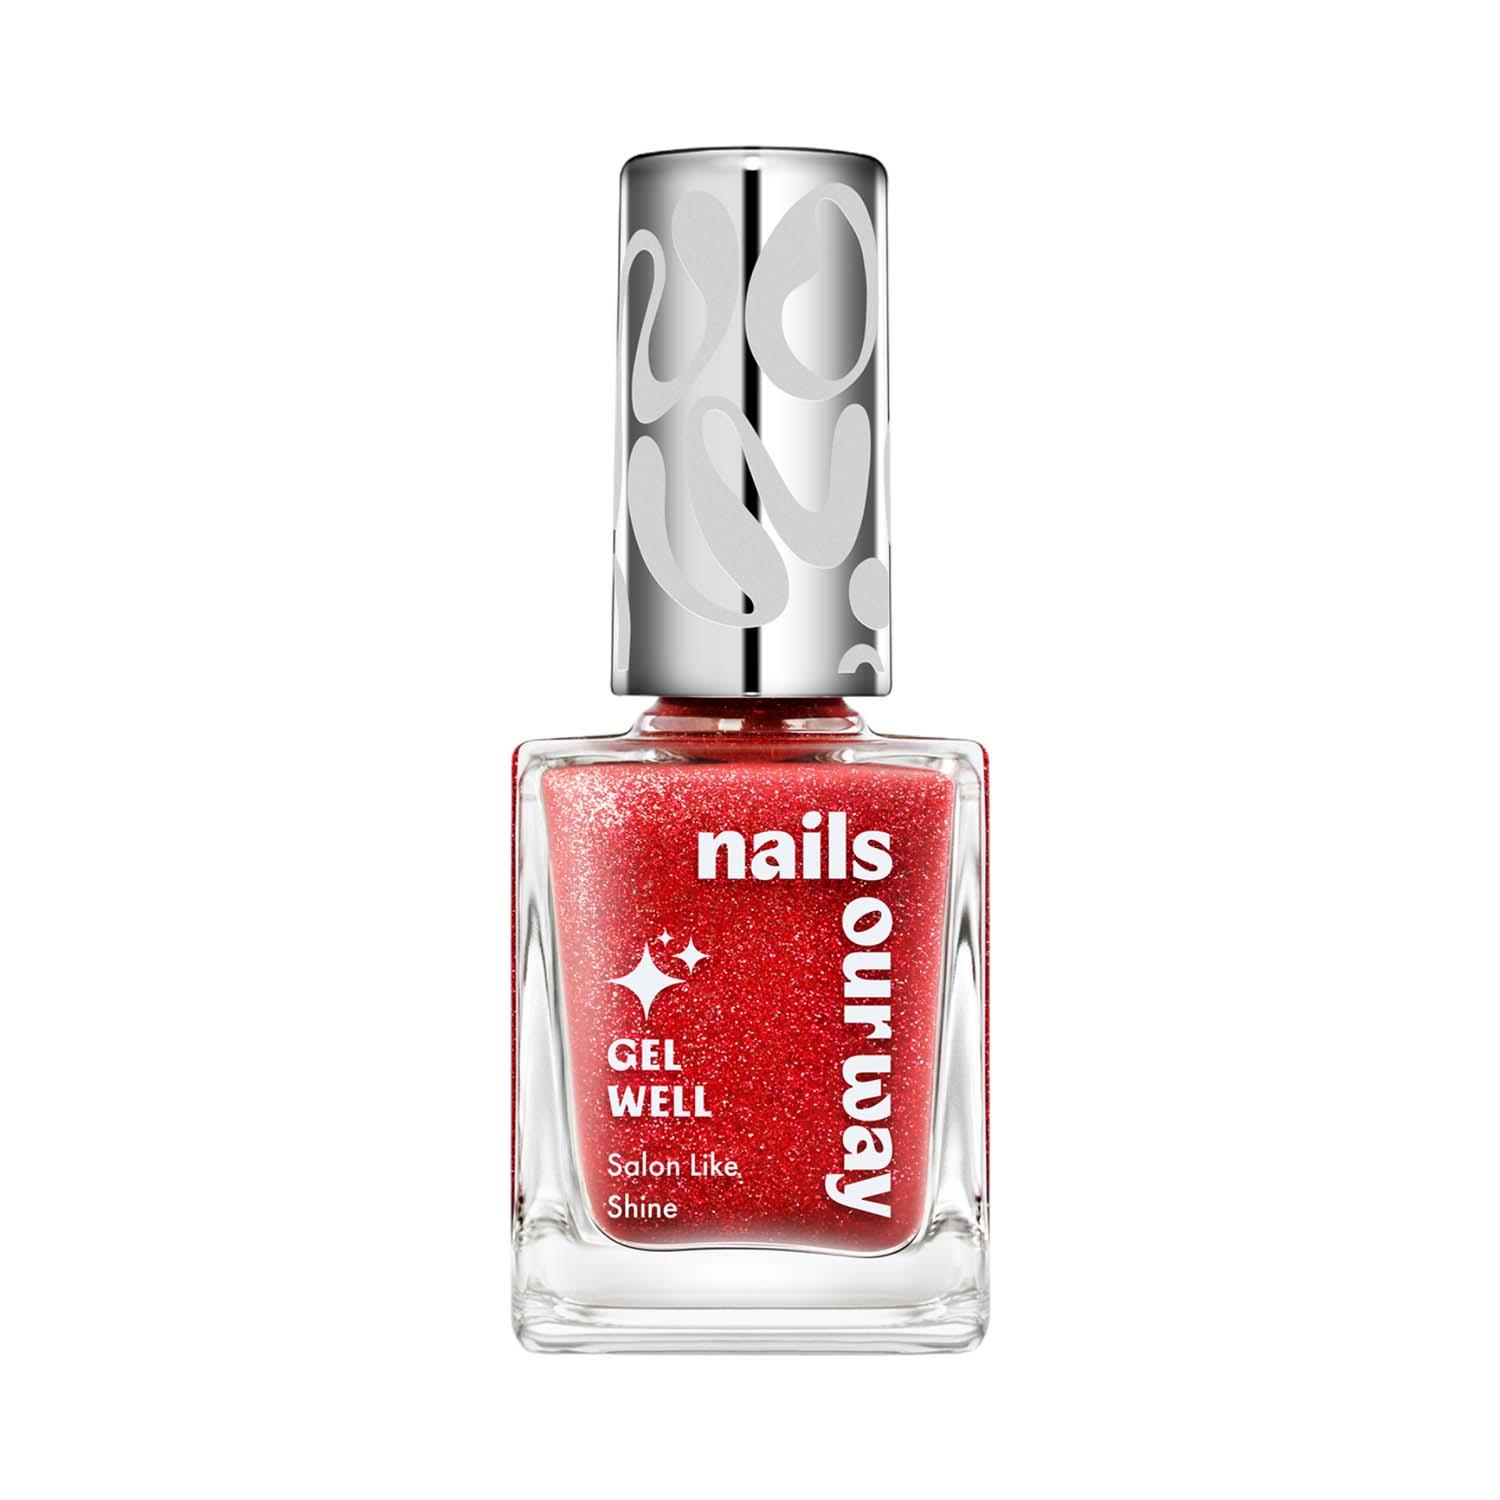 Nails Our Way | Nails Our Way Gel Well Nail Enamel - 106 Merry (10 ml)